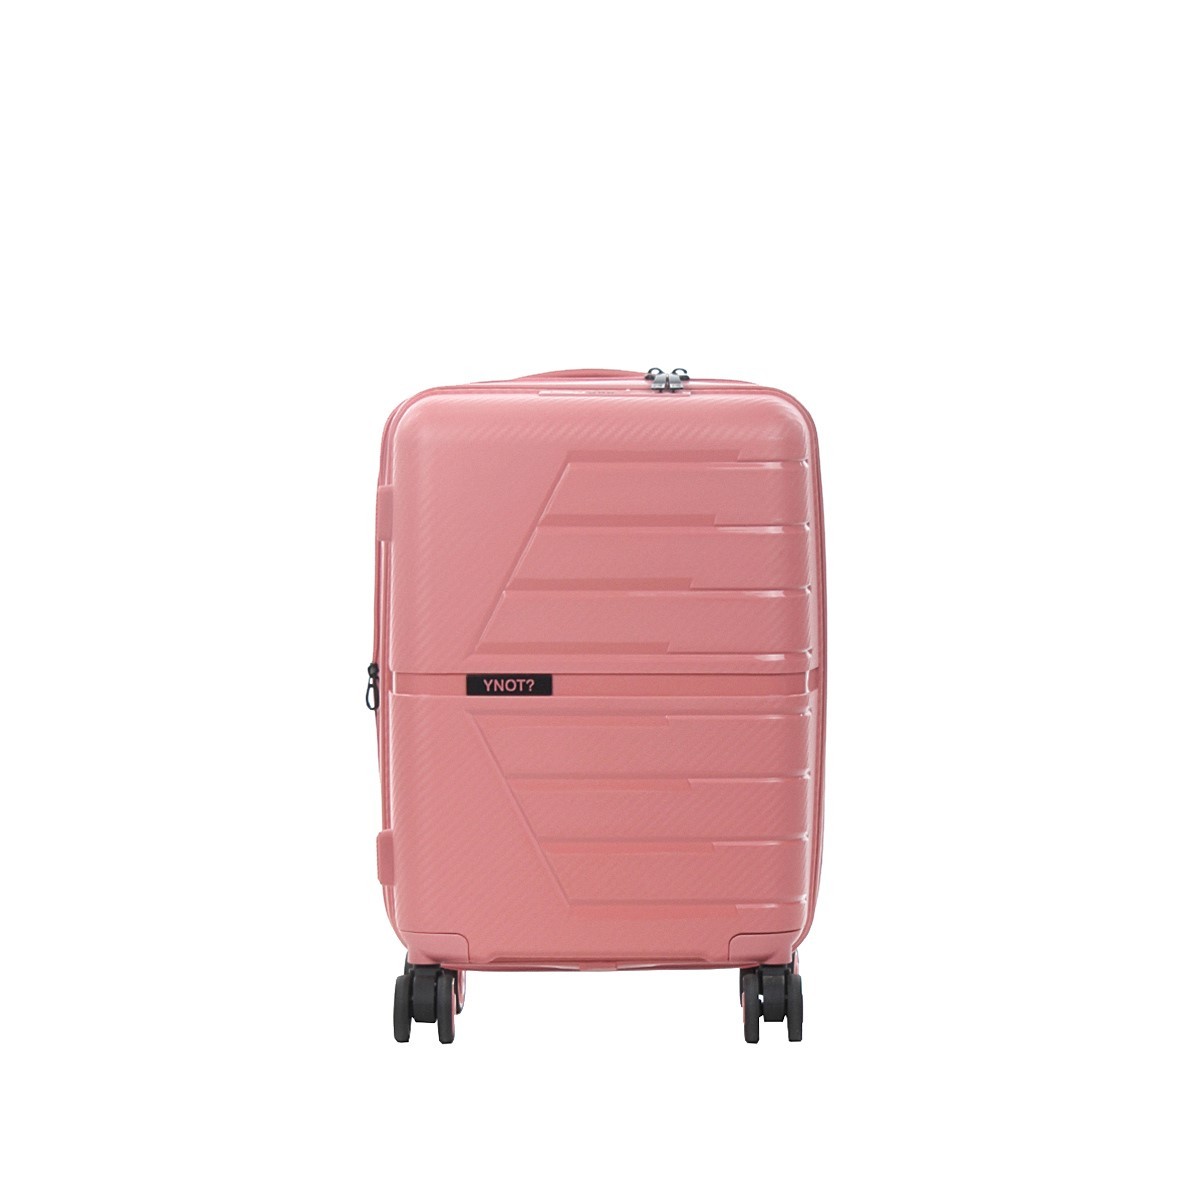 Ynot? Spinner cabina 4 ruote Rose gold Delta DEL-41001